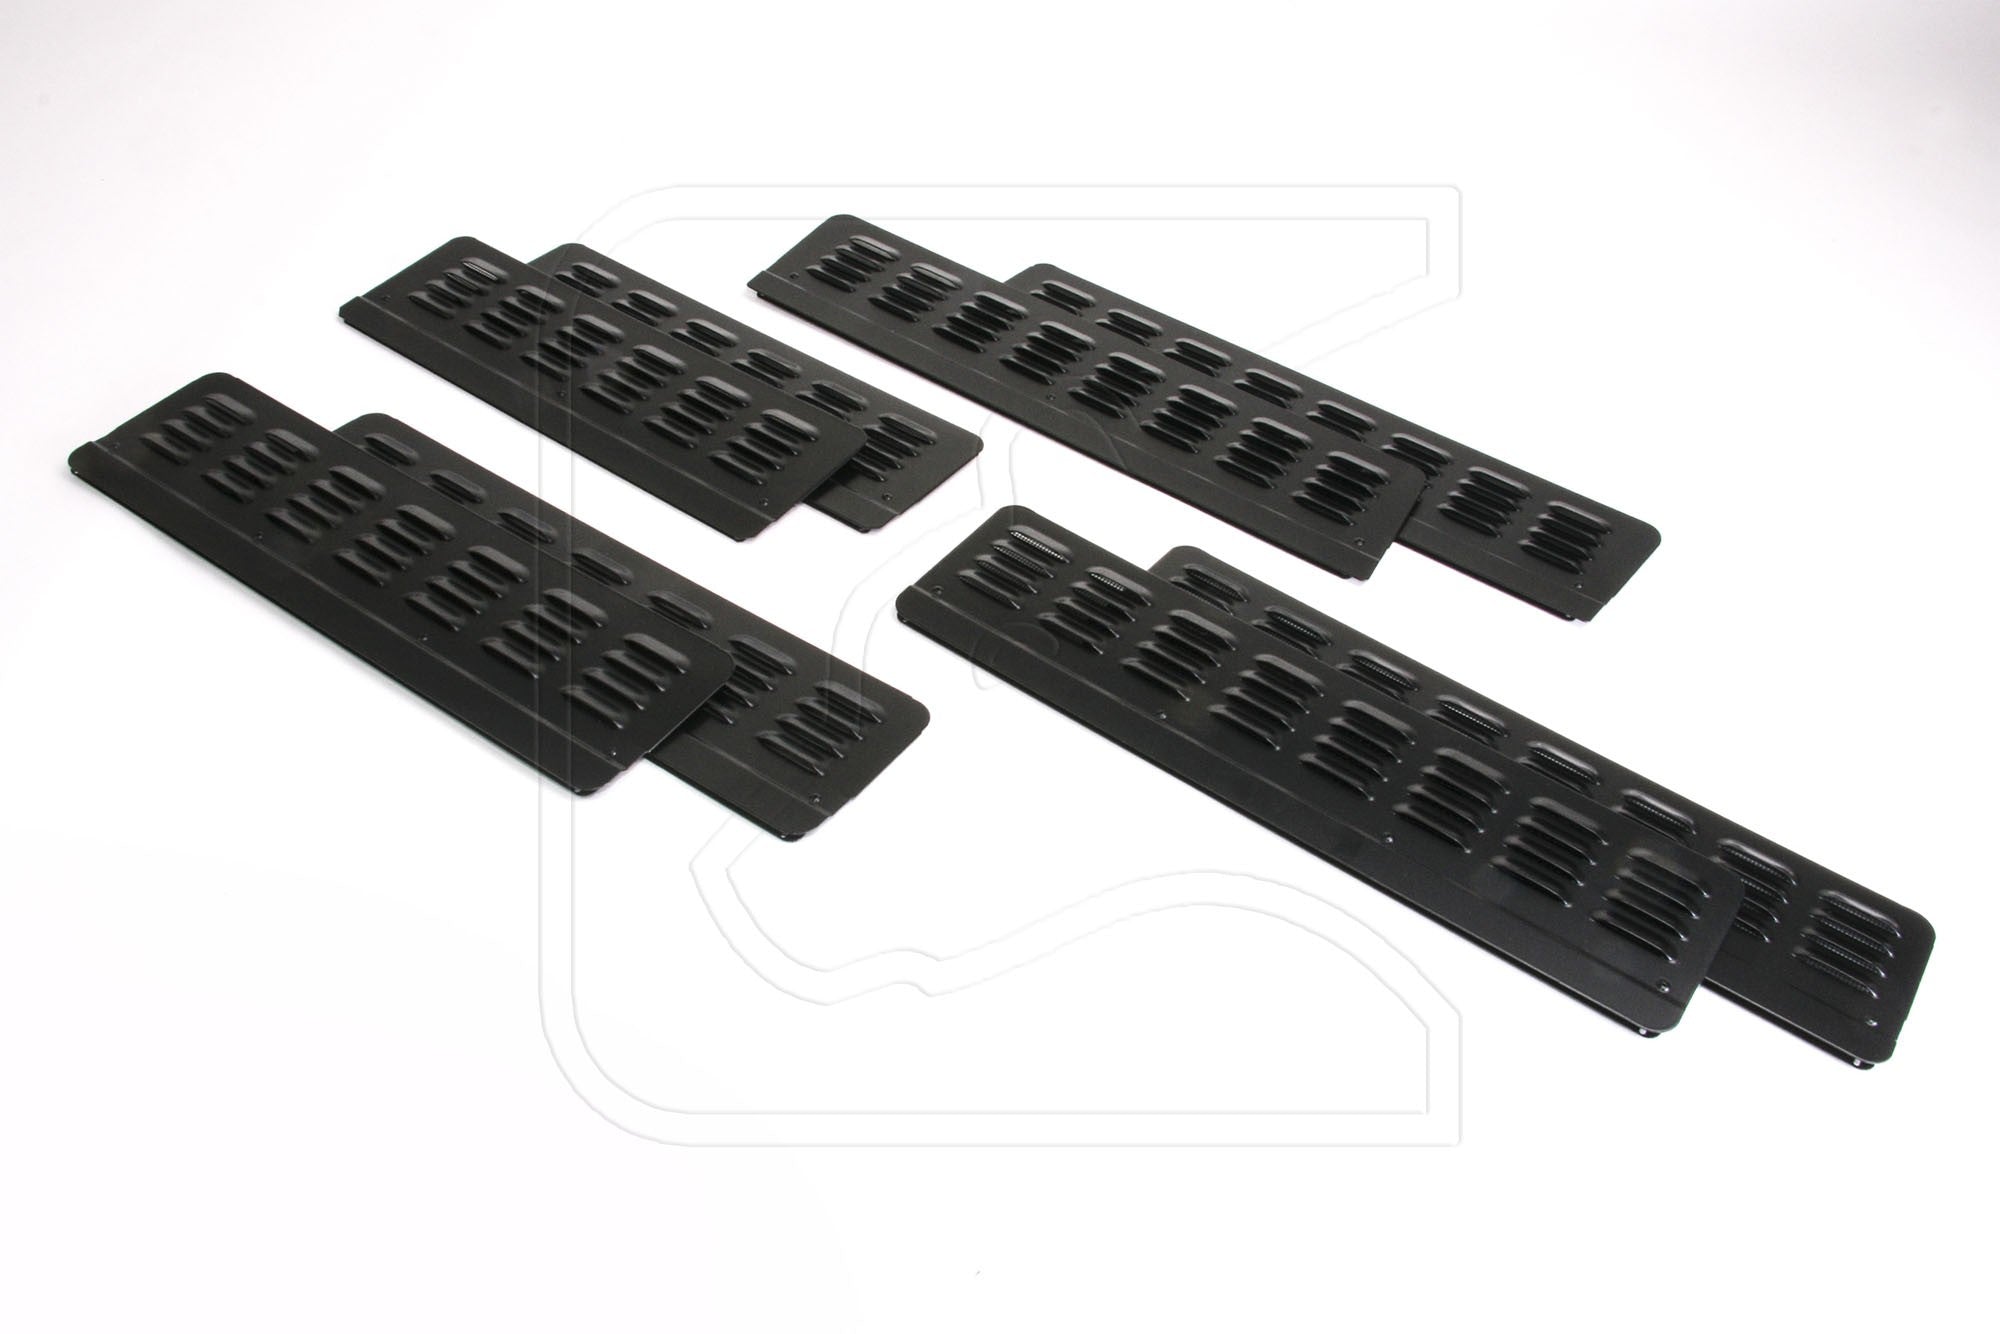 Range Rover Sport (2006-2013) 2nd Row Doors Window Vents/Screens - for Land Rover (set of 2)